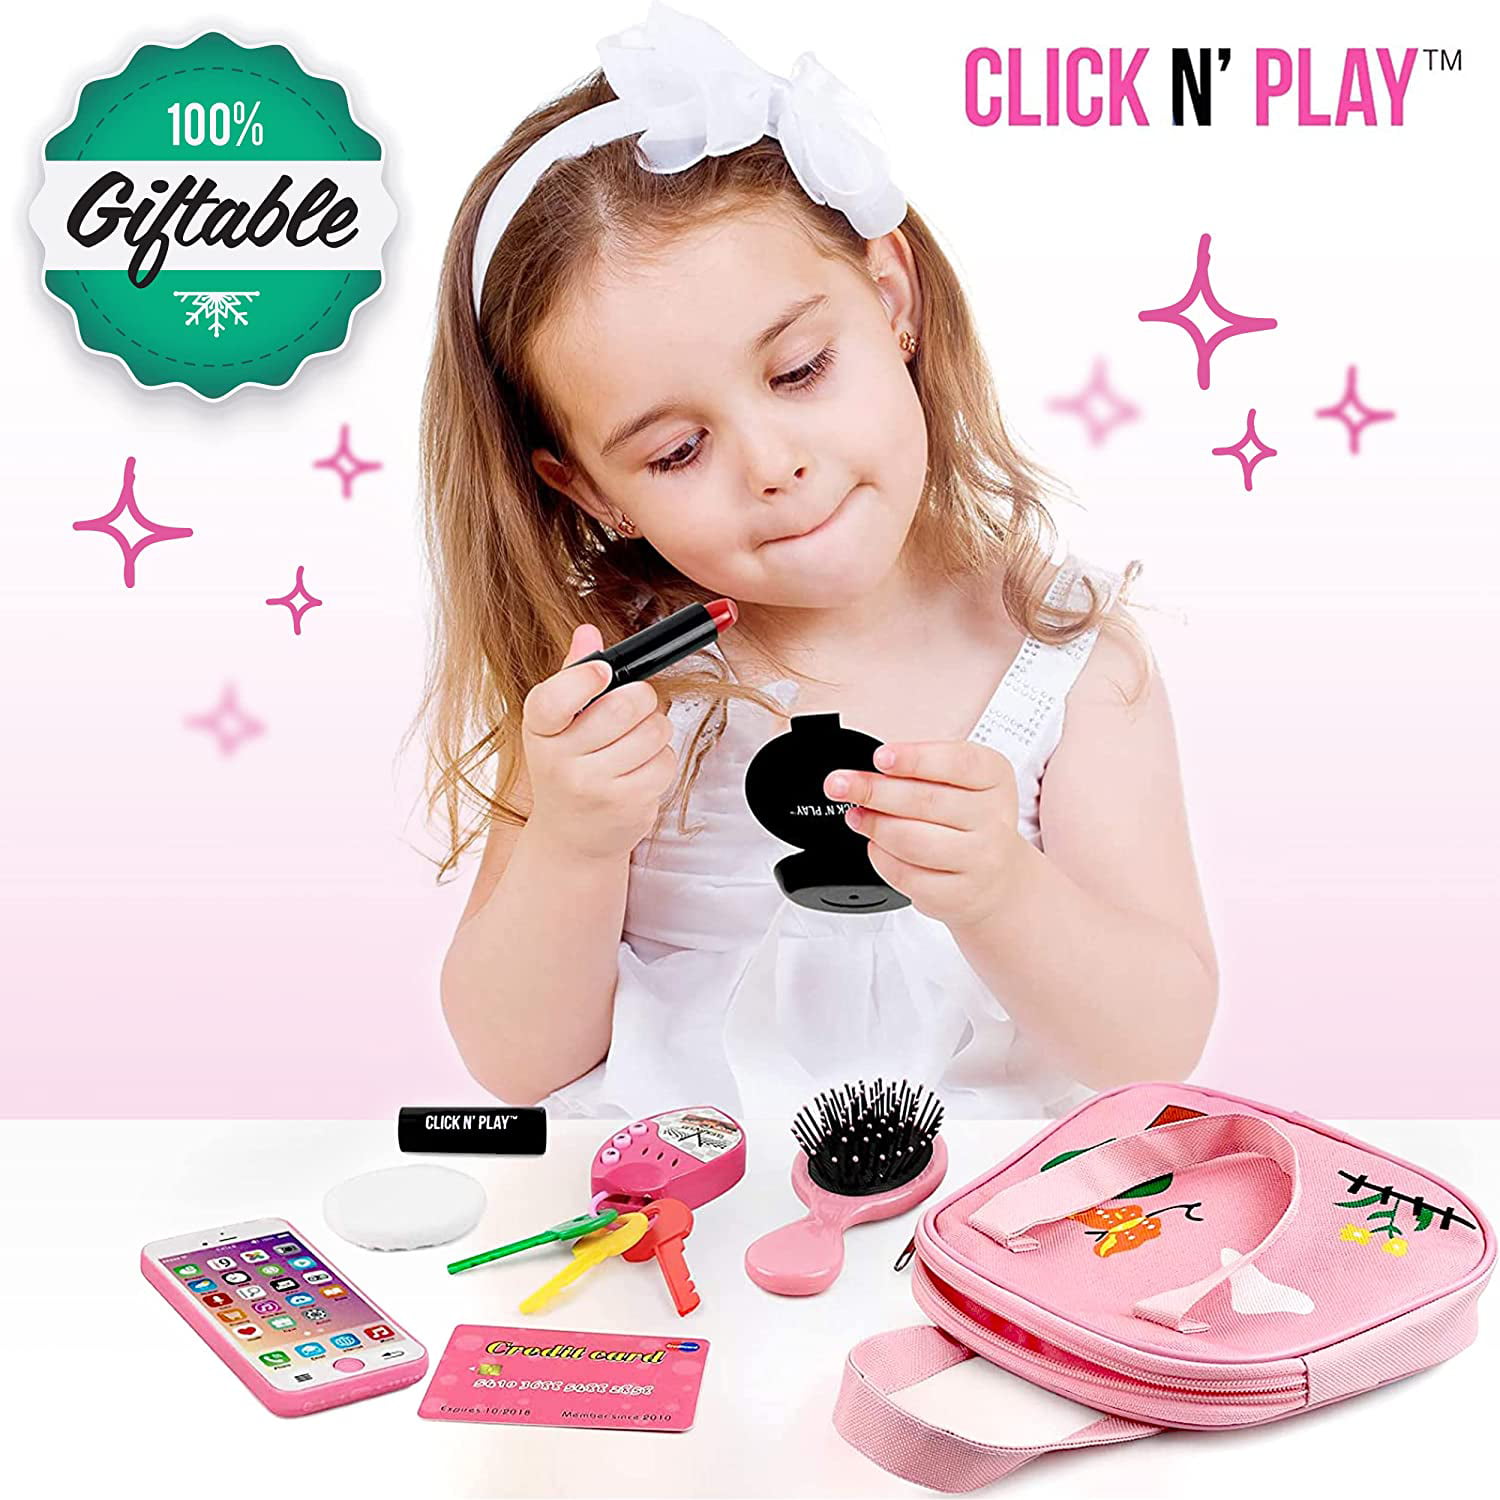 Click N' Play Little Girls Purse, Pretend Play Purse 20 Piece Set, Toys for Girls 3+, Toy Purse with Makeup, Smartphone, Wallet, Keys, Sunglasses